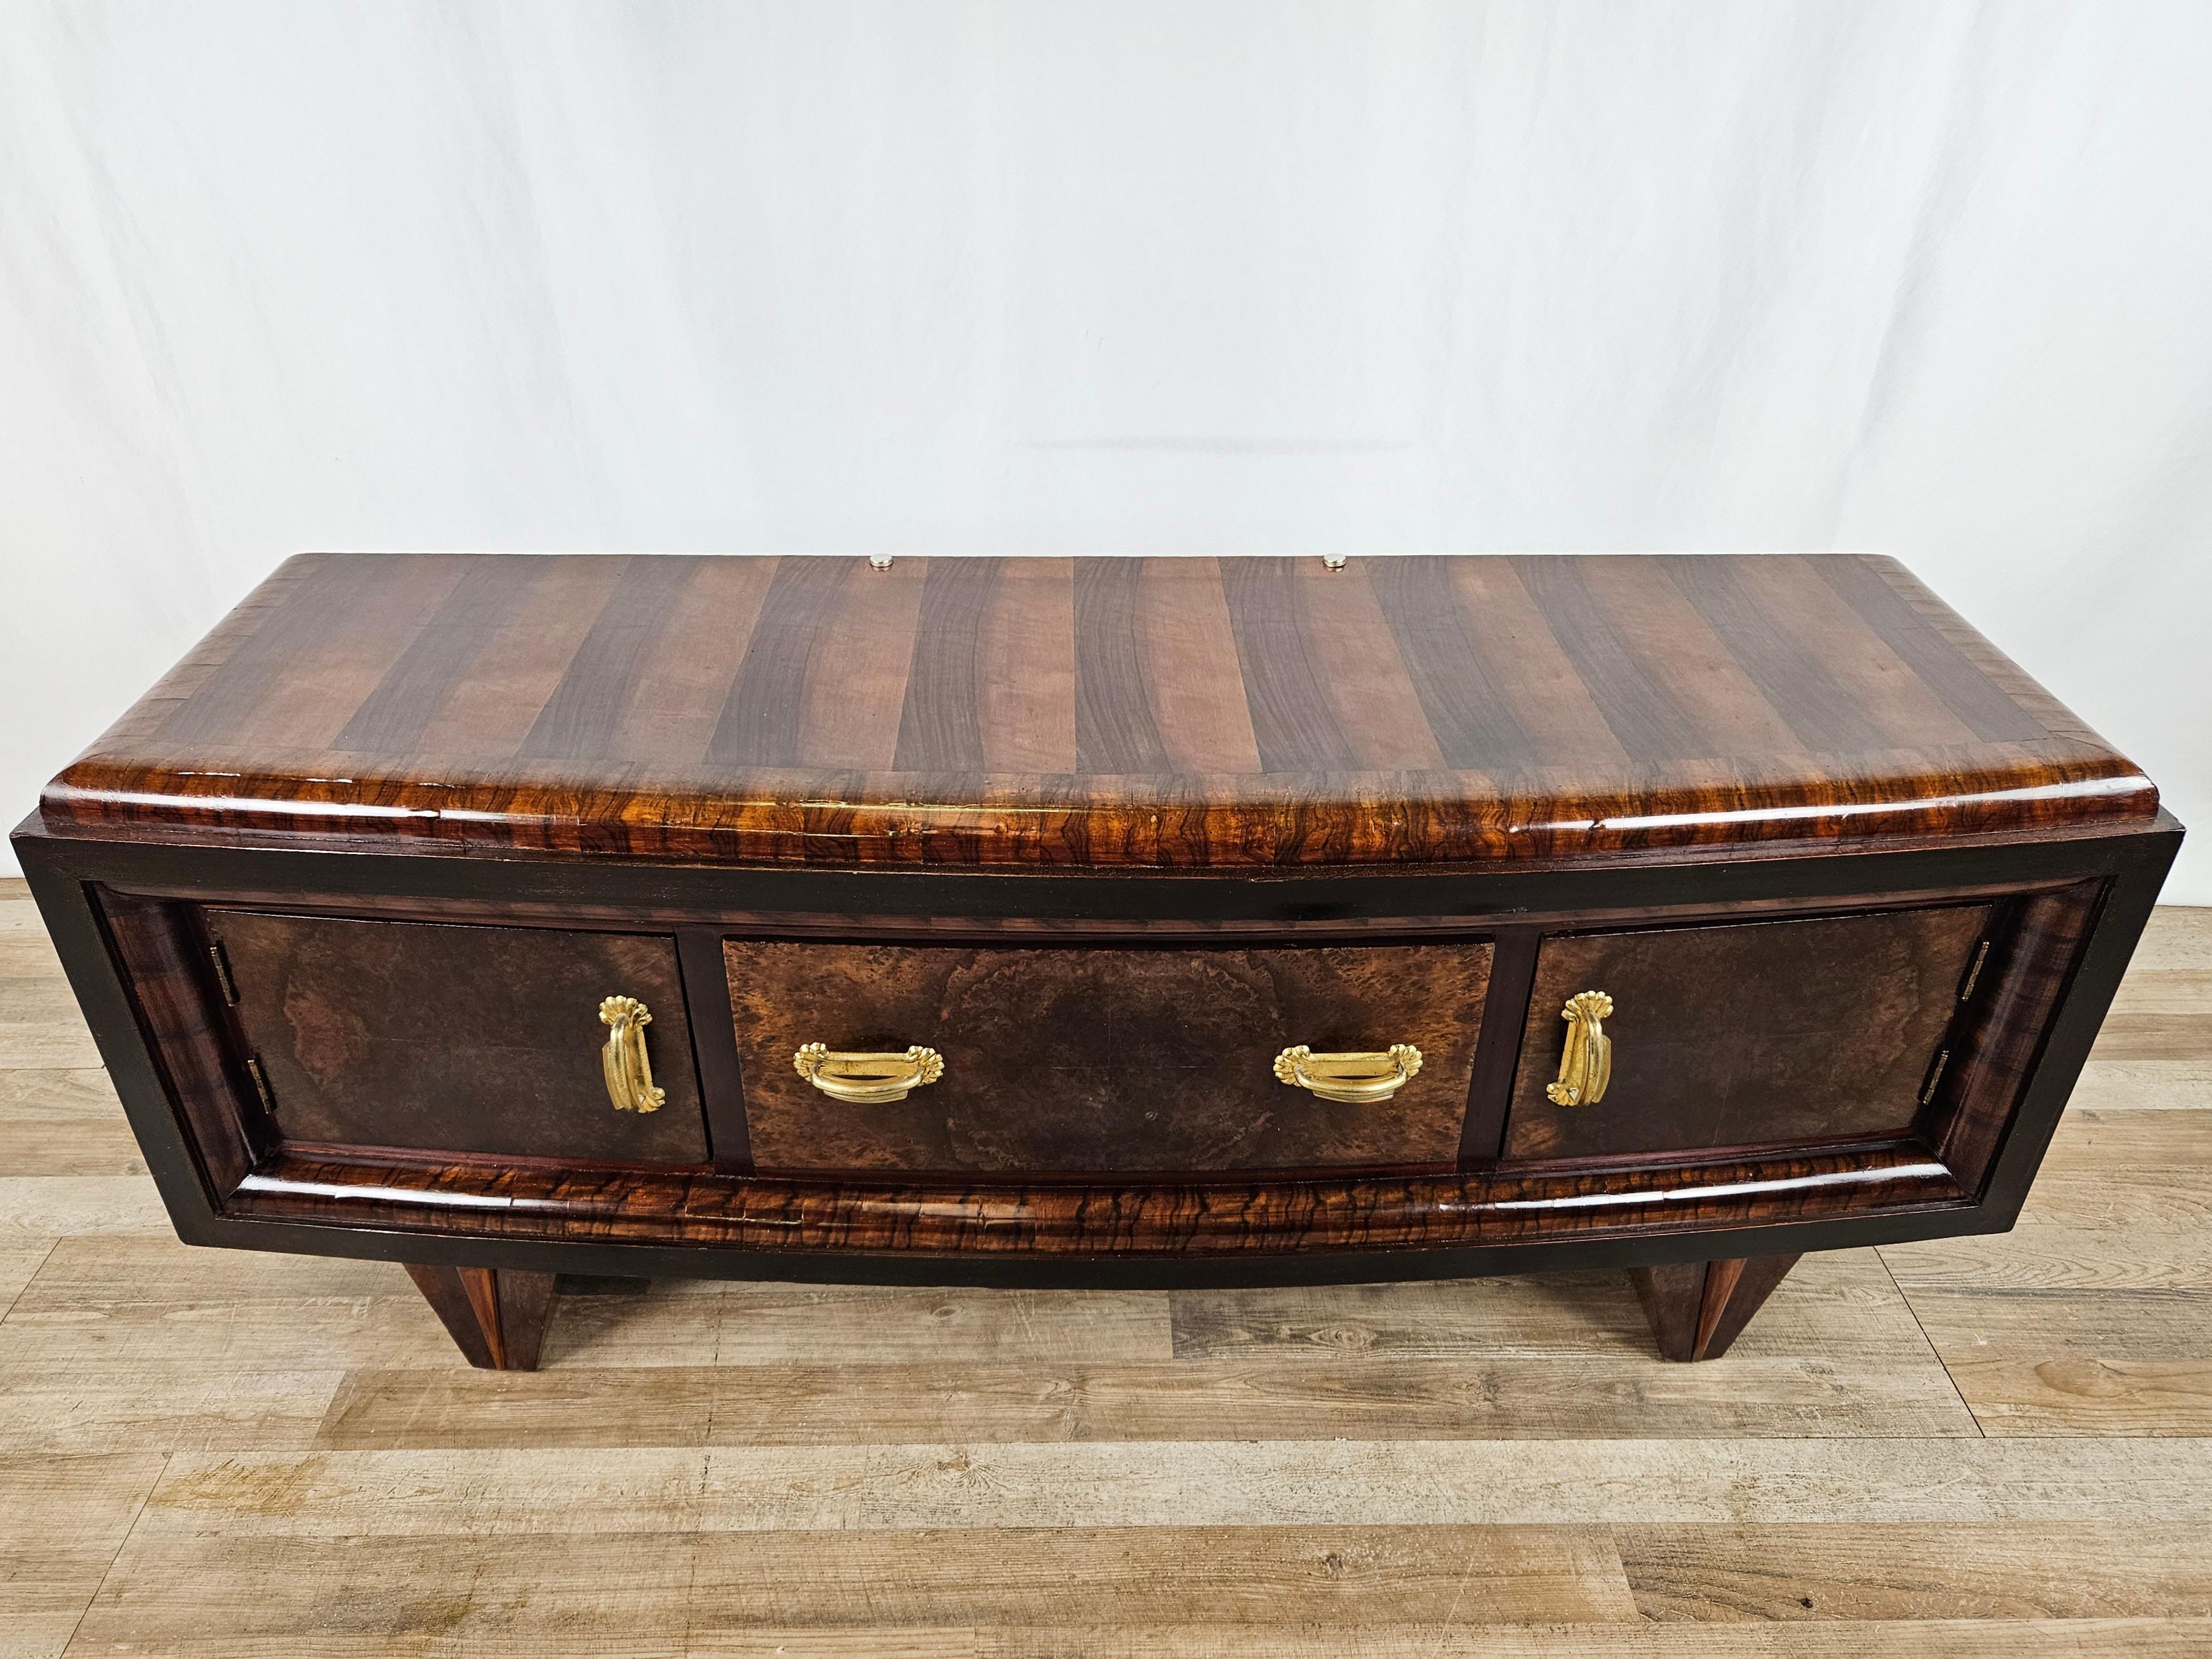 Art Deco style bedroom dressing table made entirely of mahogany burl with ebony profiles, Italian 1930s production of high quality and workmanship.

Elegant and refined design, enriched by a linear and soft shape perfectly adaptable to any type of